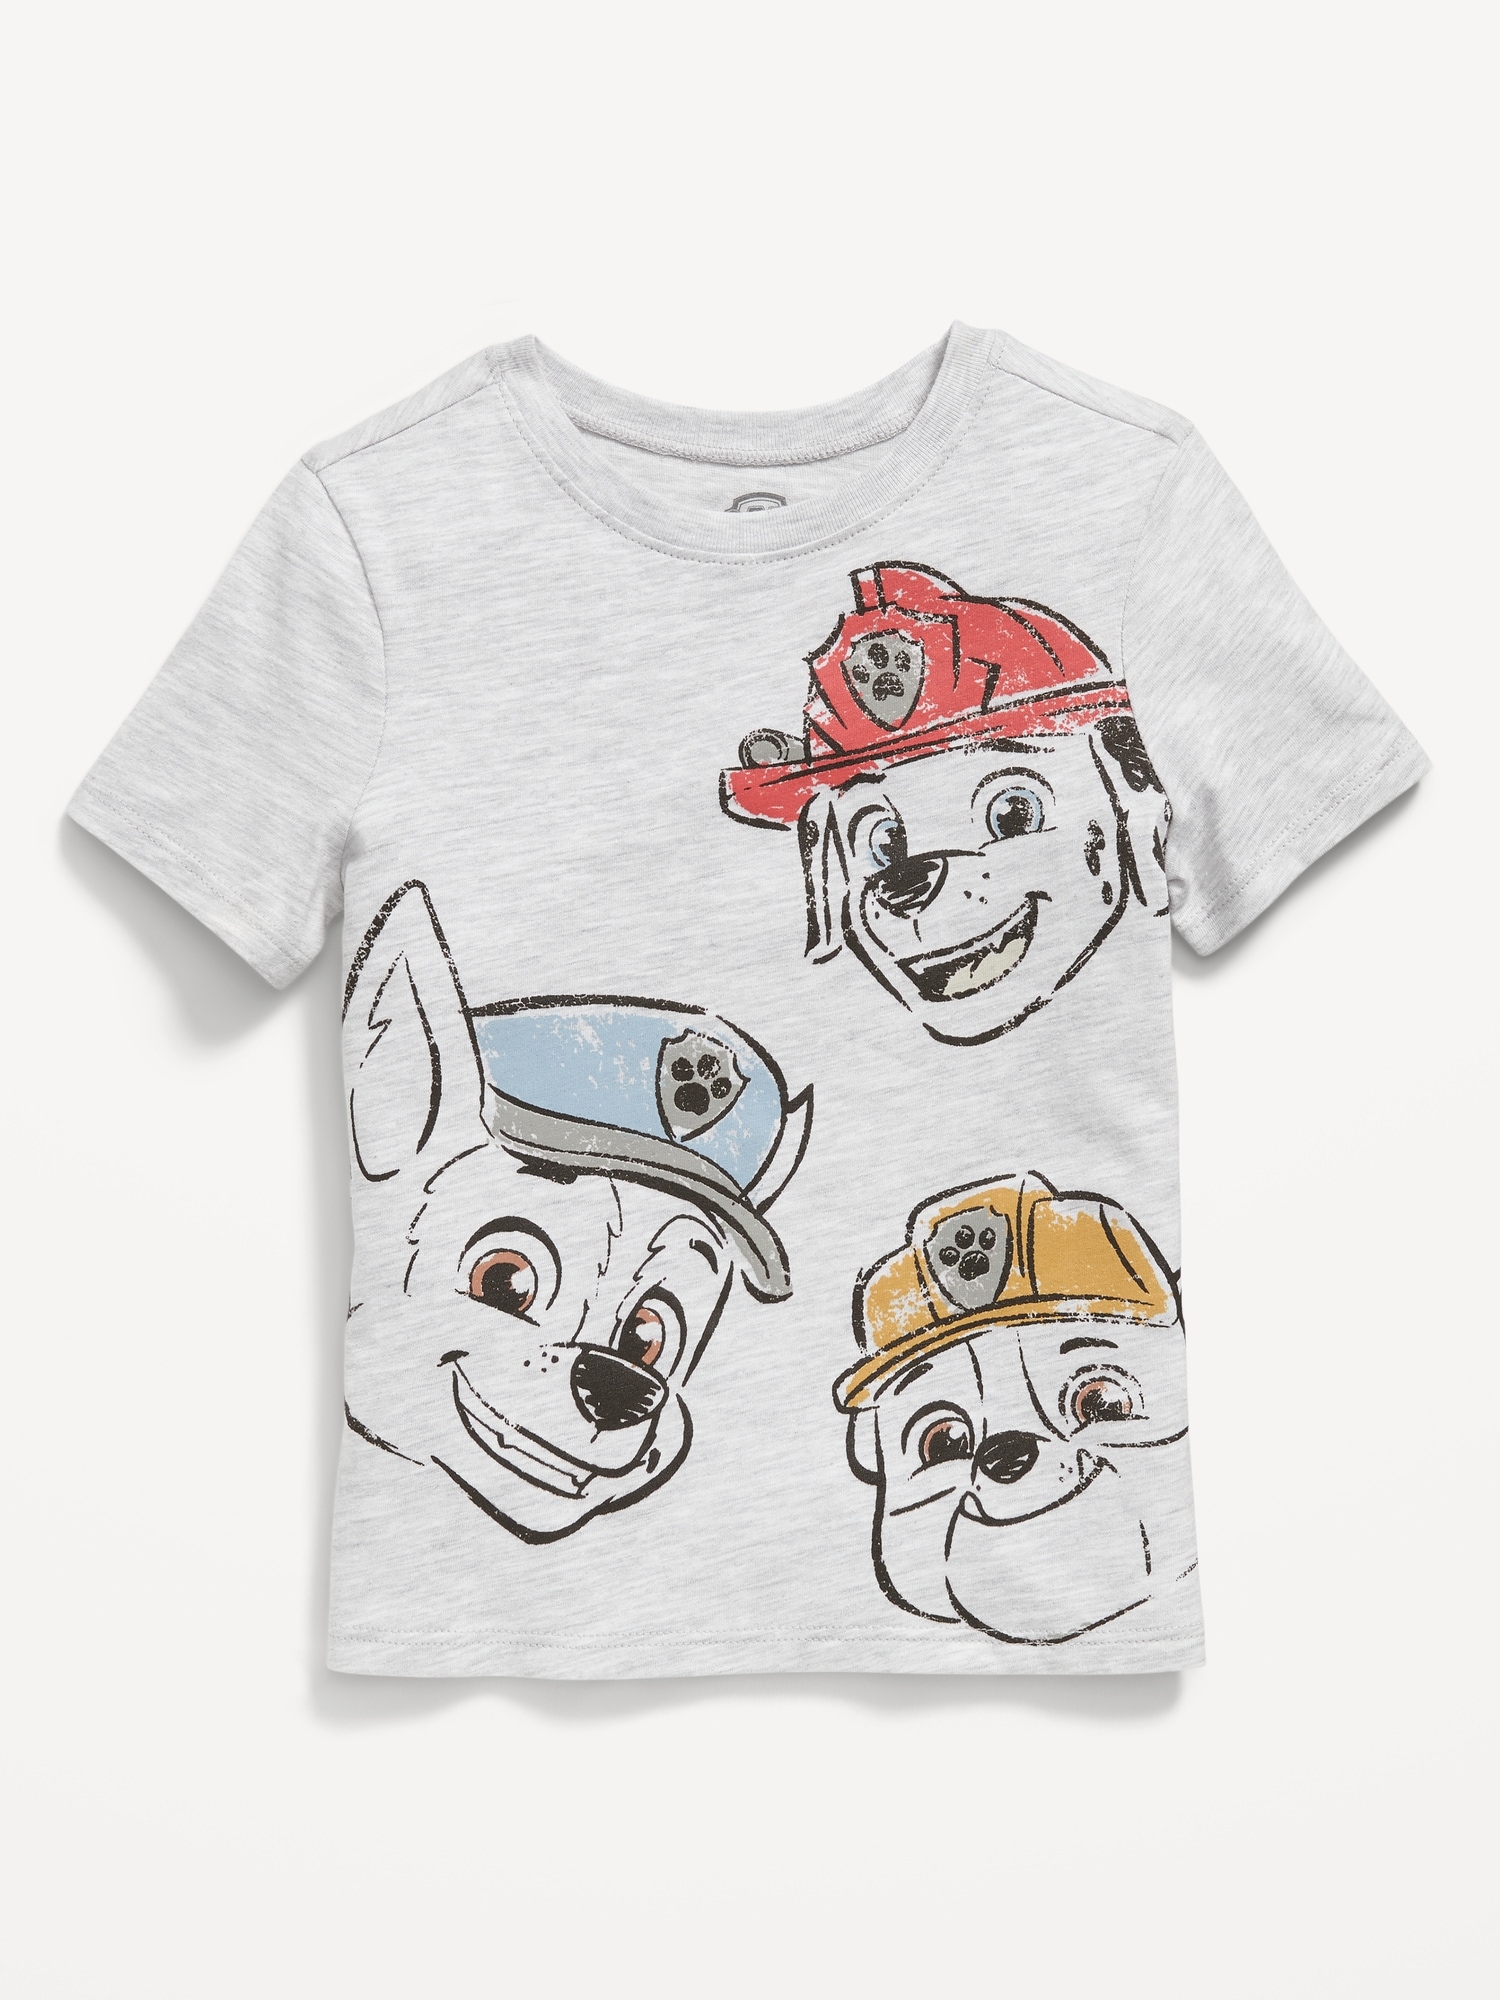 Paw Patrol 100% Cotton Other Clothing for Boys Sizes 2T-5T